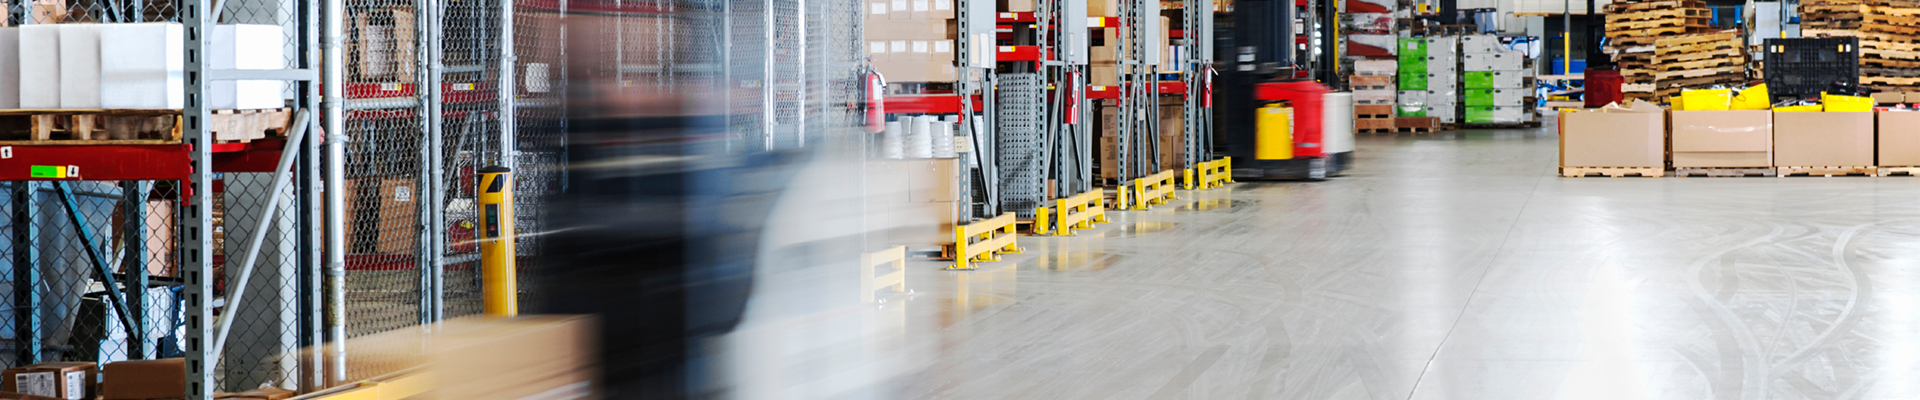 Storage Solutions: The Key to an Organised Warehouse